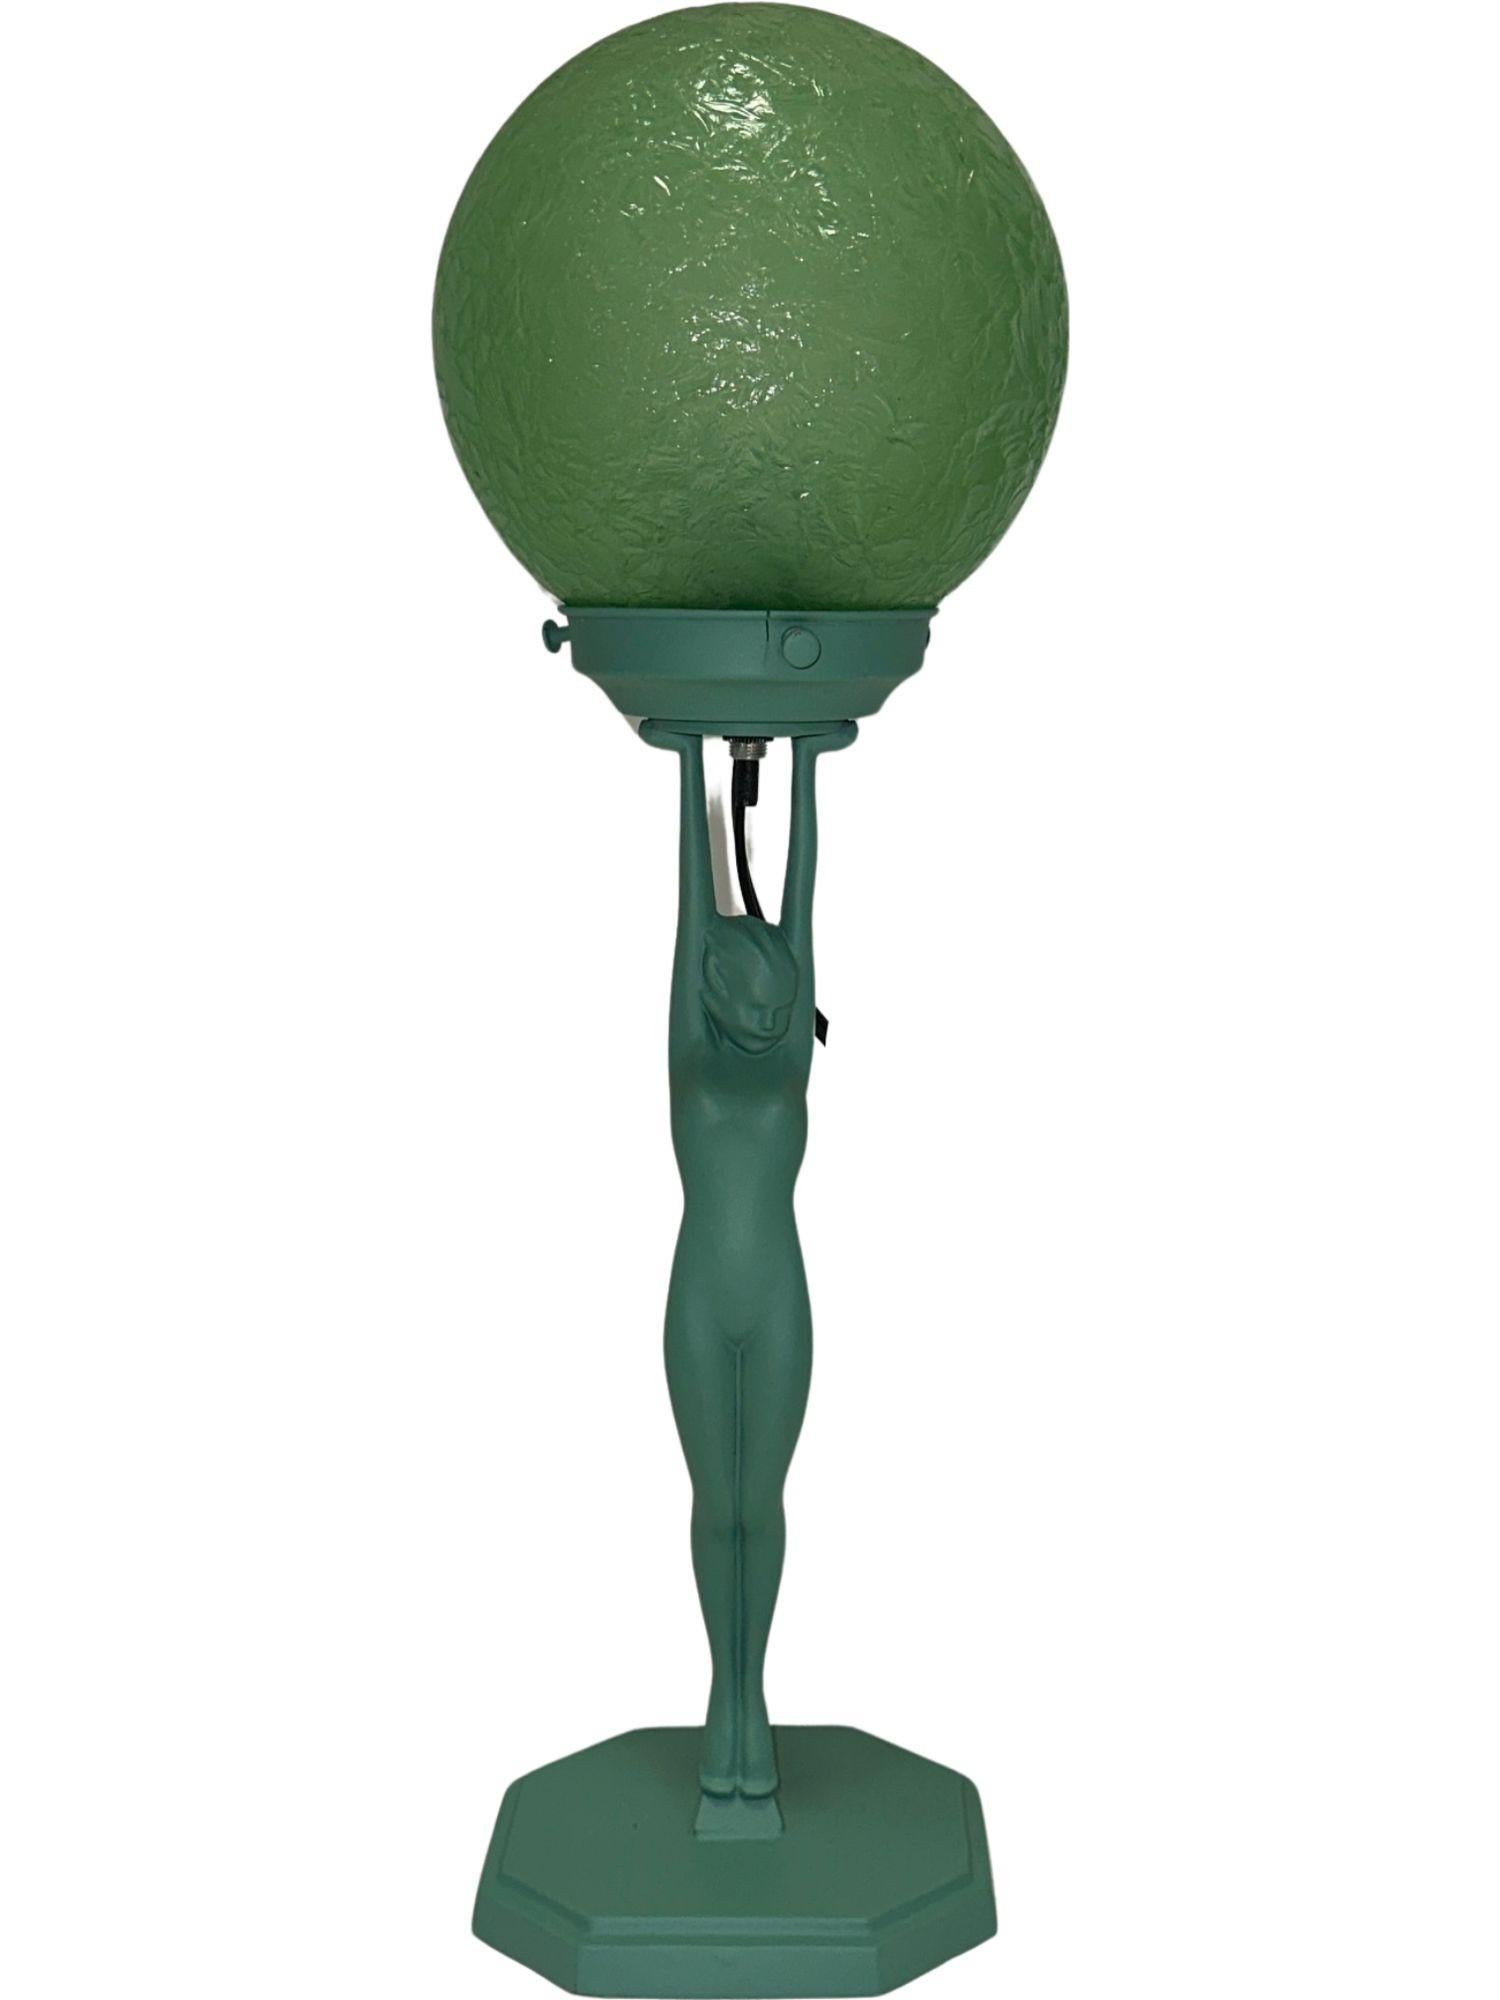 It features an exquisite nymph cradling a green glass lampshade adorned with a 'cracked ice' texture, all elegantly perched atop an octagonal stepped base. This base includes attached cardboard and felt for stability, with a charming verdigris